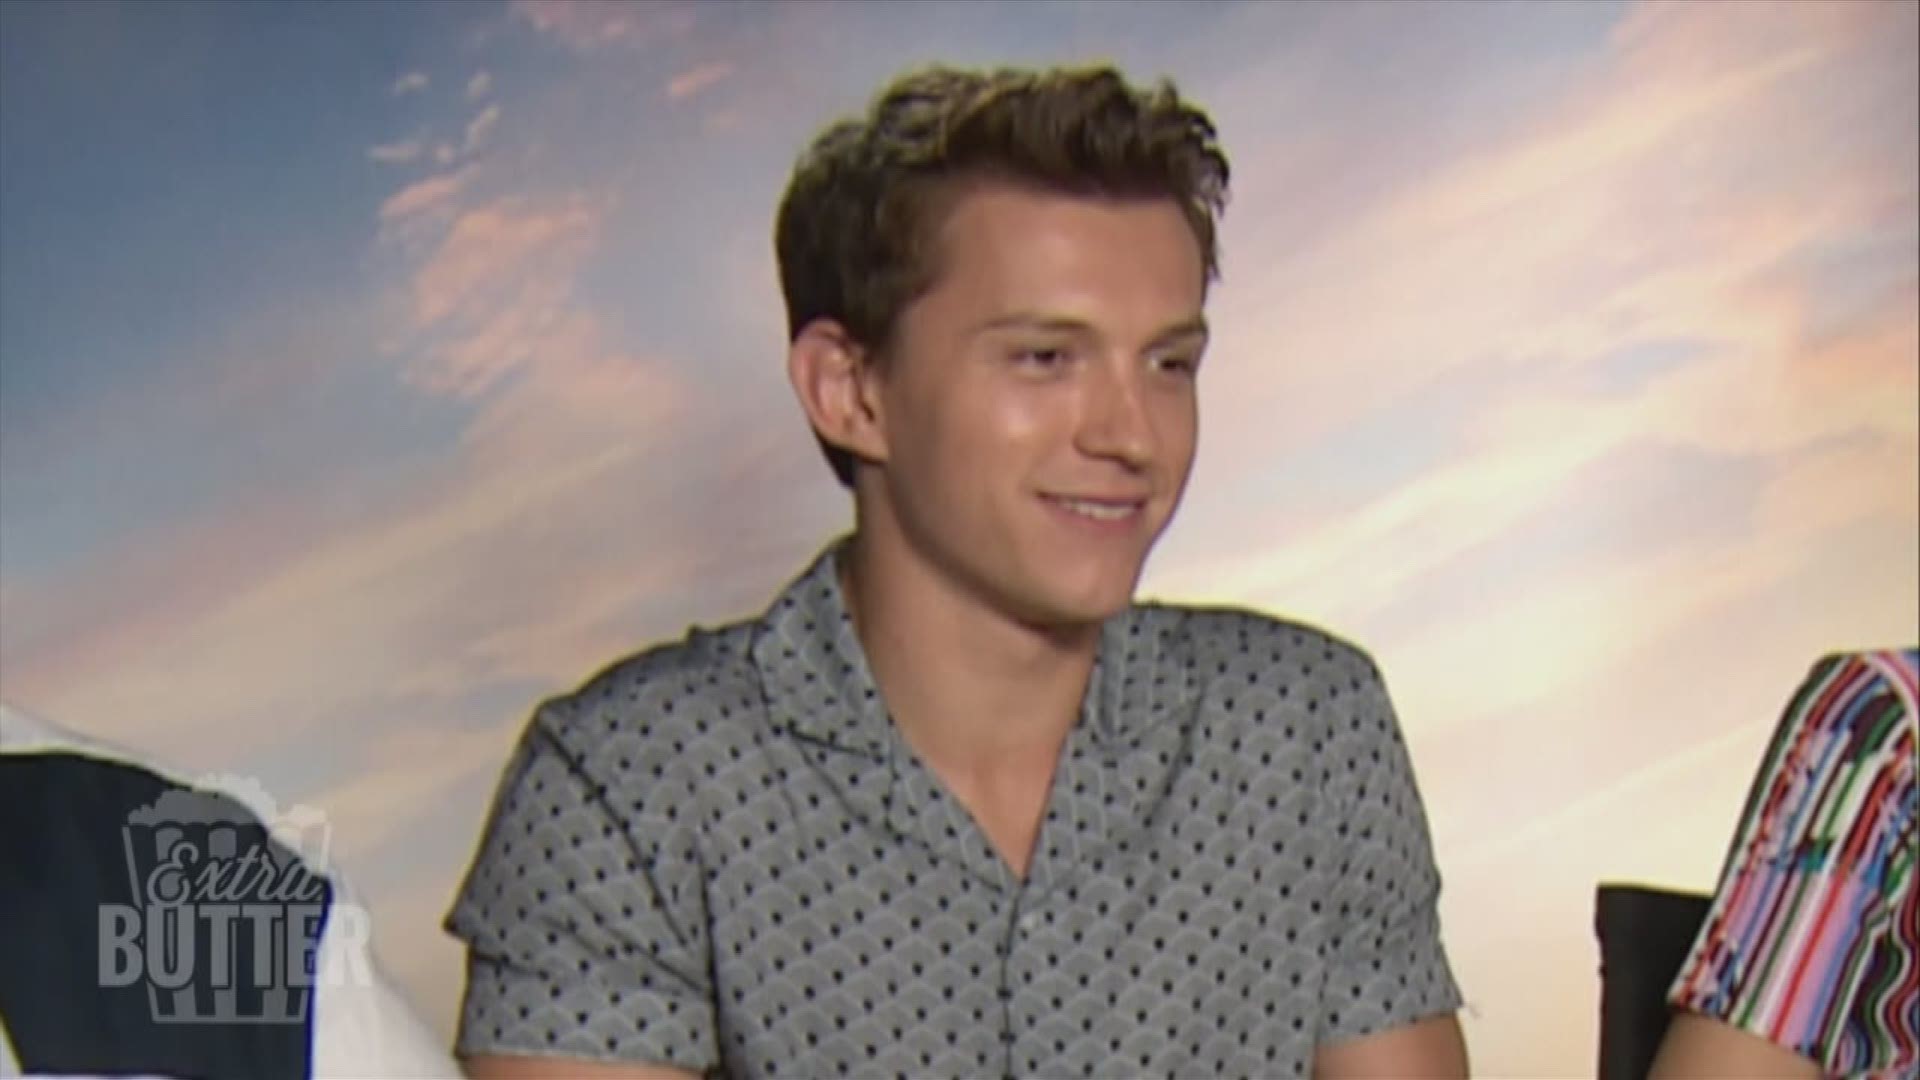 Extra Butter travels to London to talk with the stars of 'Spider-Man: Far From Home.' Tom Holland, Zendaya and Jacob Batalon sit down with Mark S. Allen.